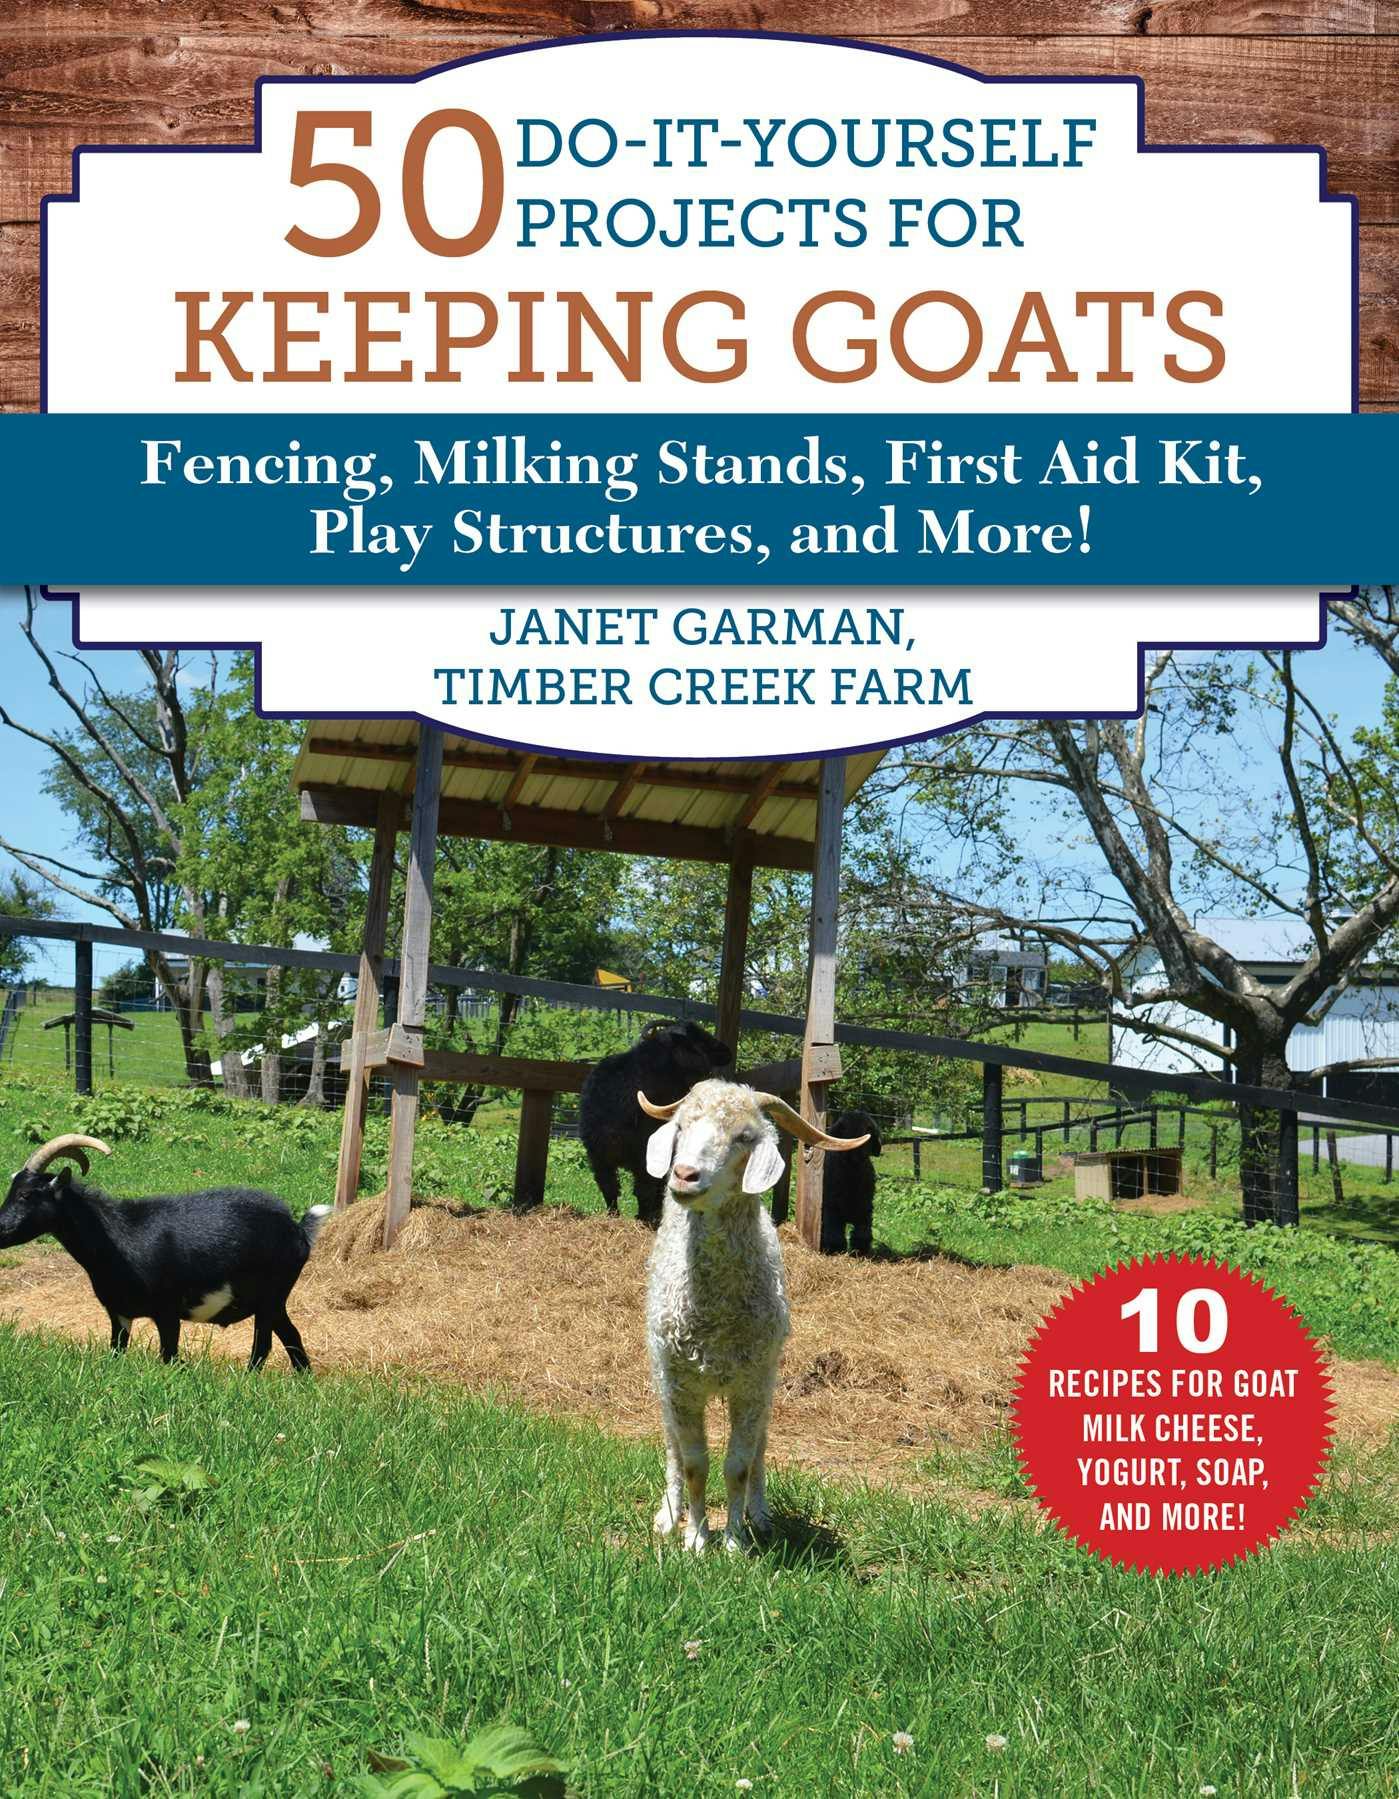 50 Do-It-Yourself Projects for Keeping Goats: Fencing, Milking Stands, First Aid Kit, Play Structures, and More! - undefined